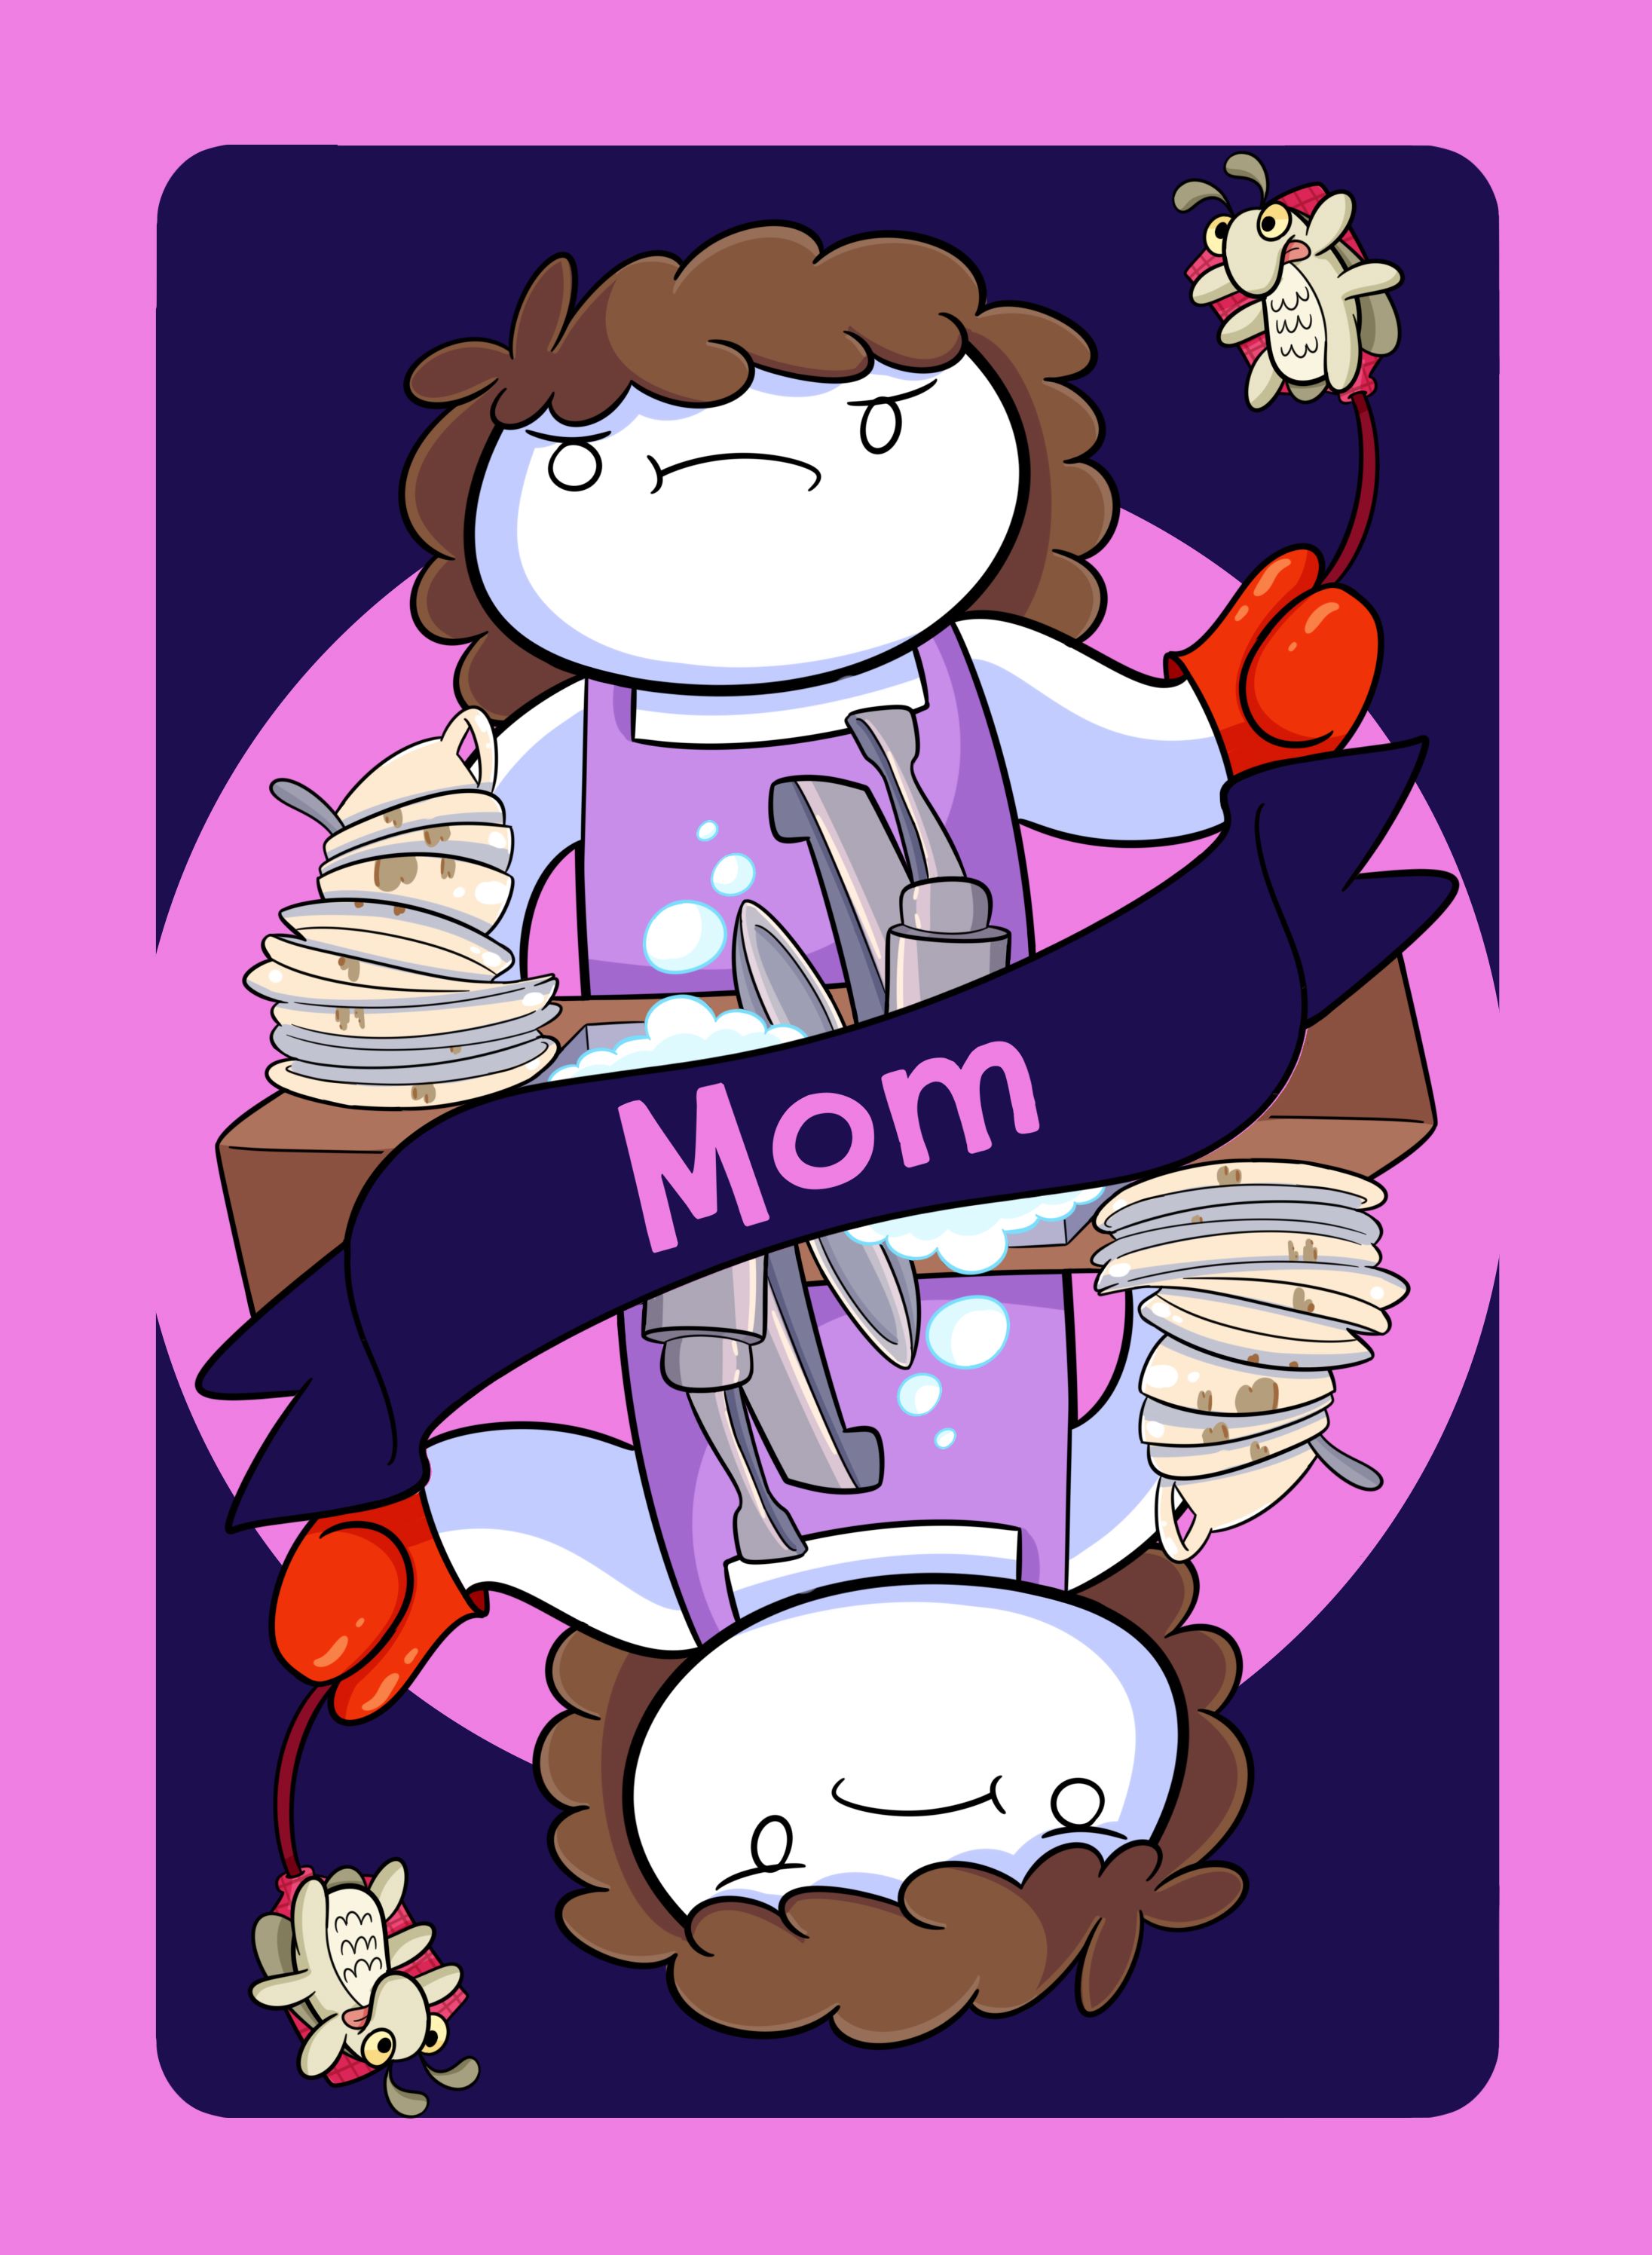 Theodd1Sout Wallpapers